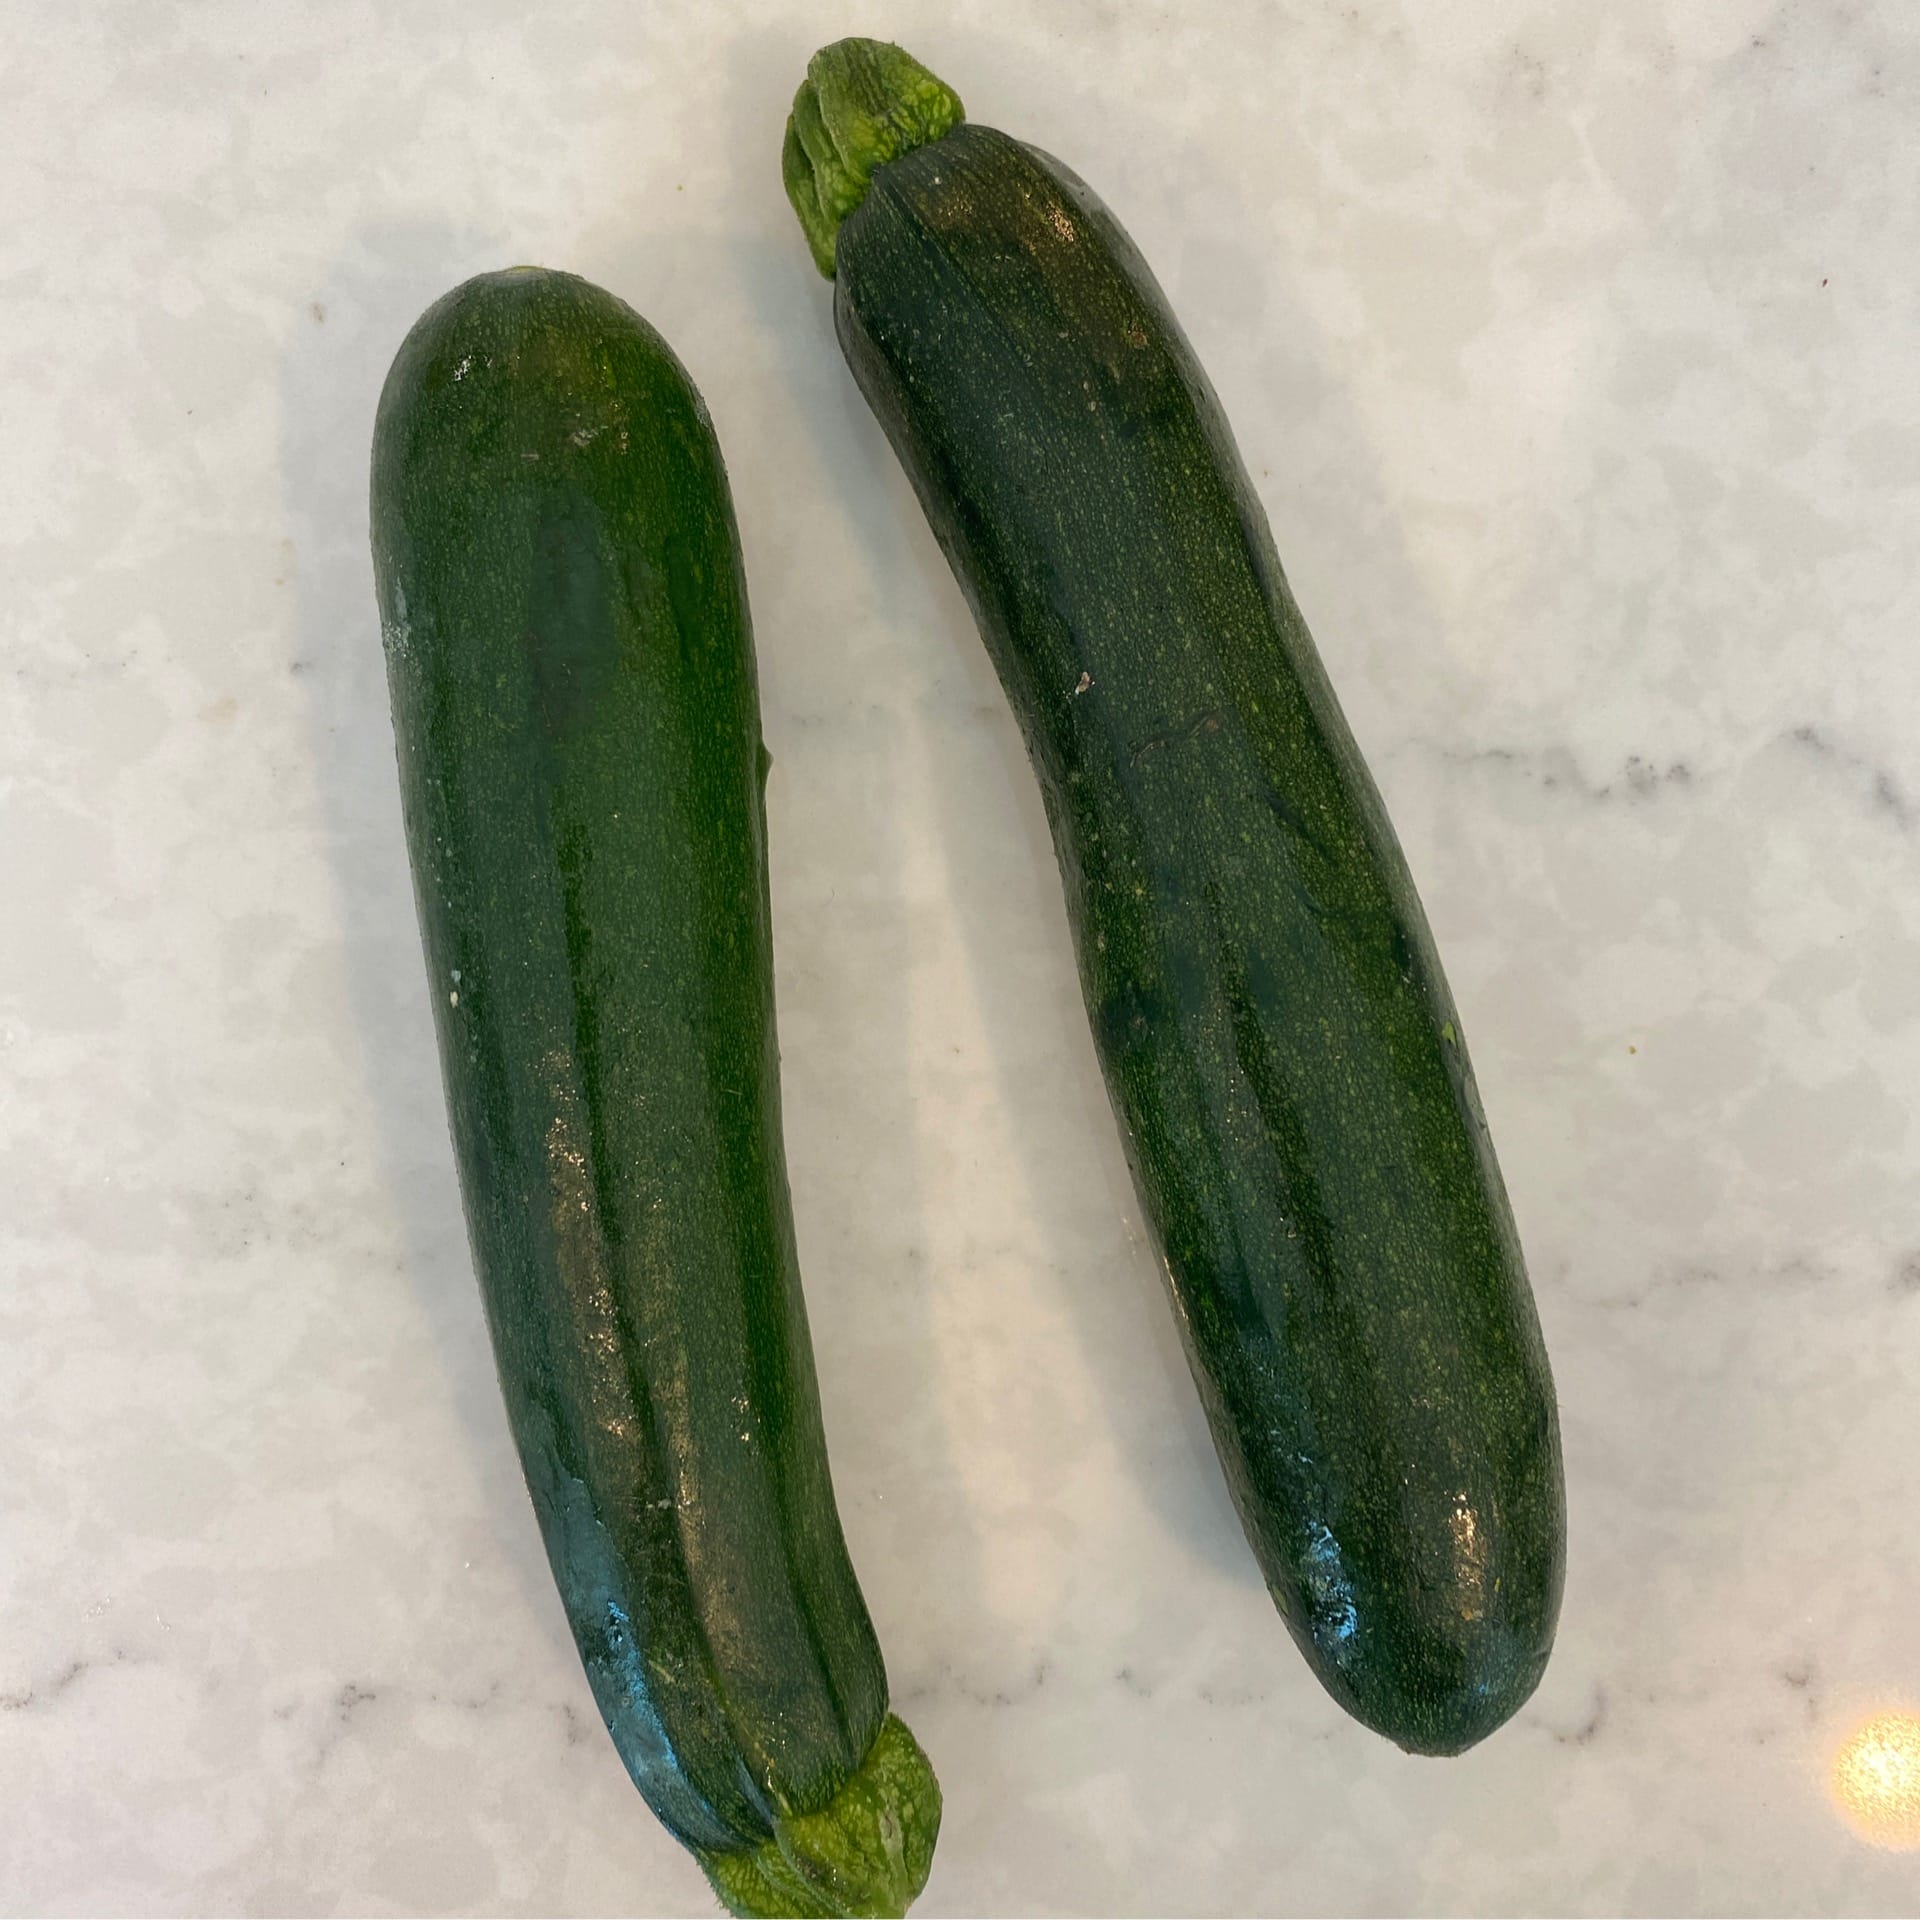 sold out sale zucchini